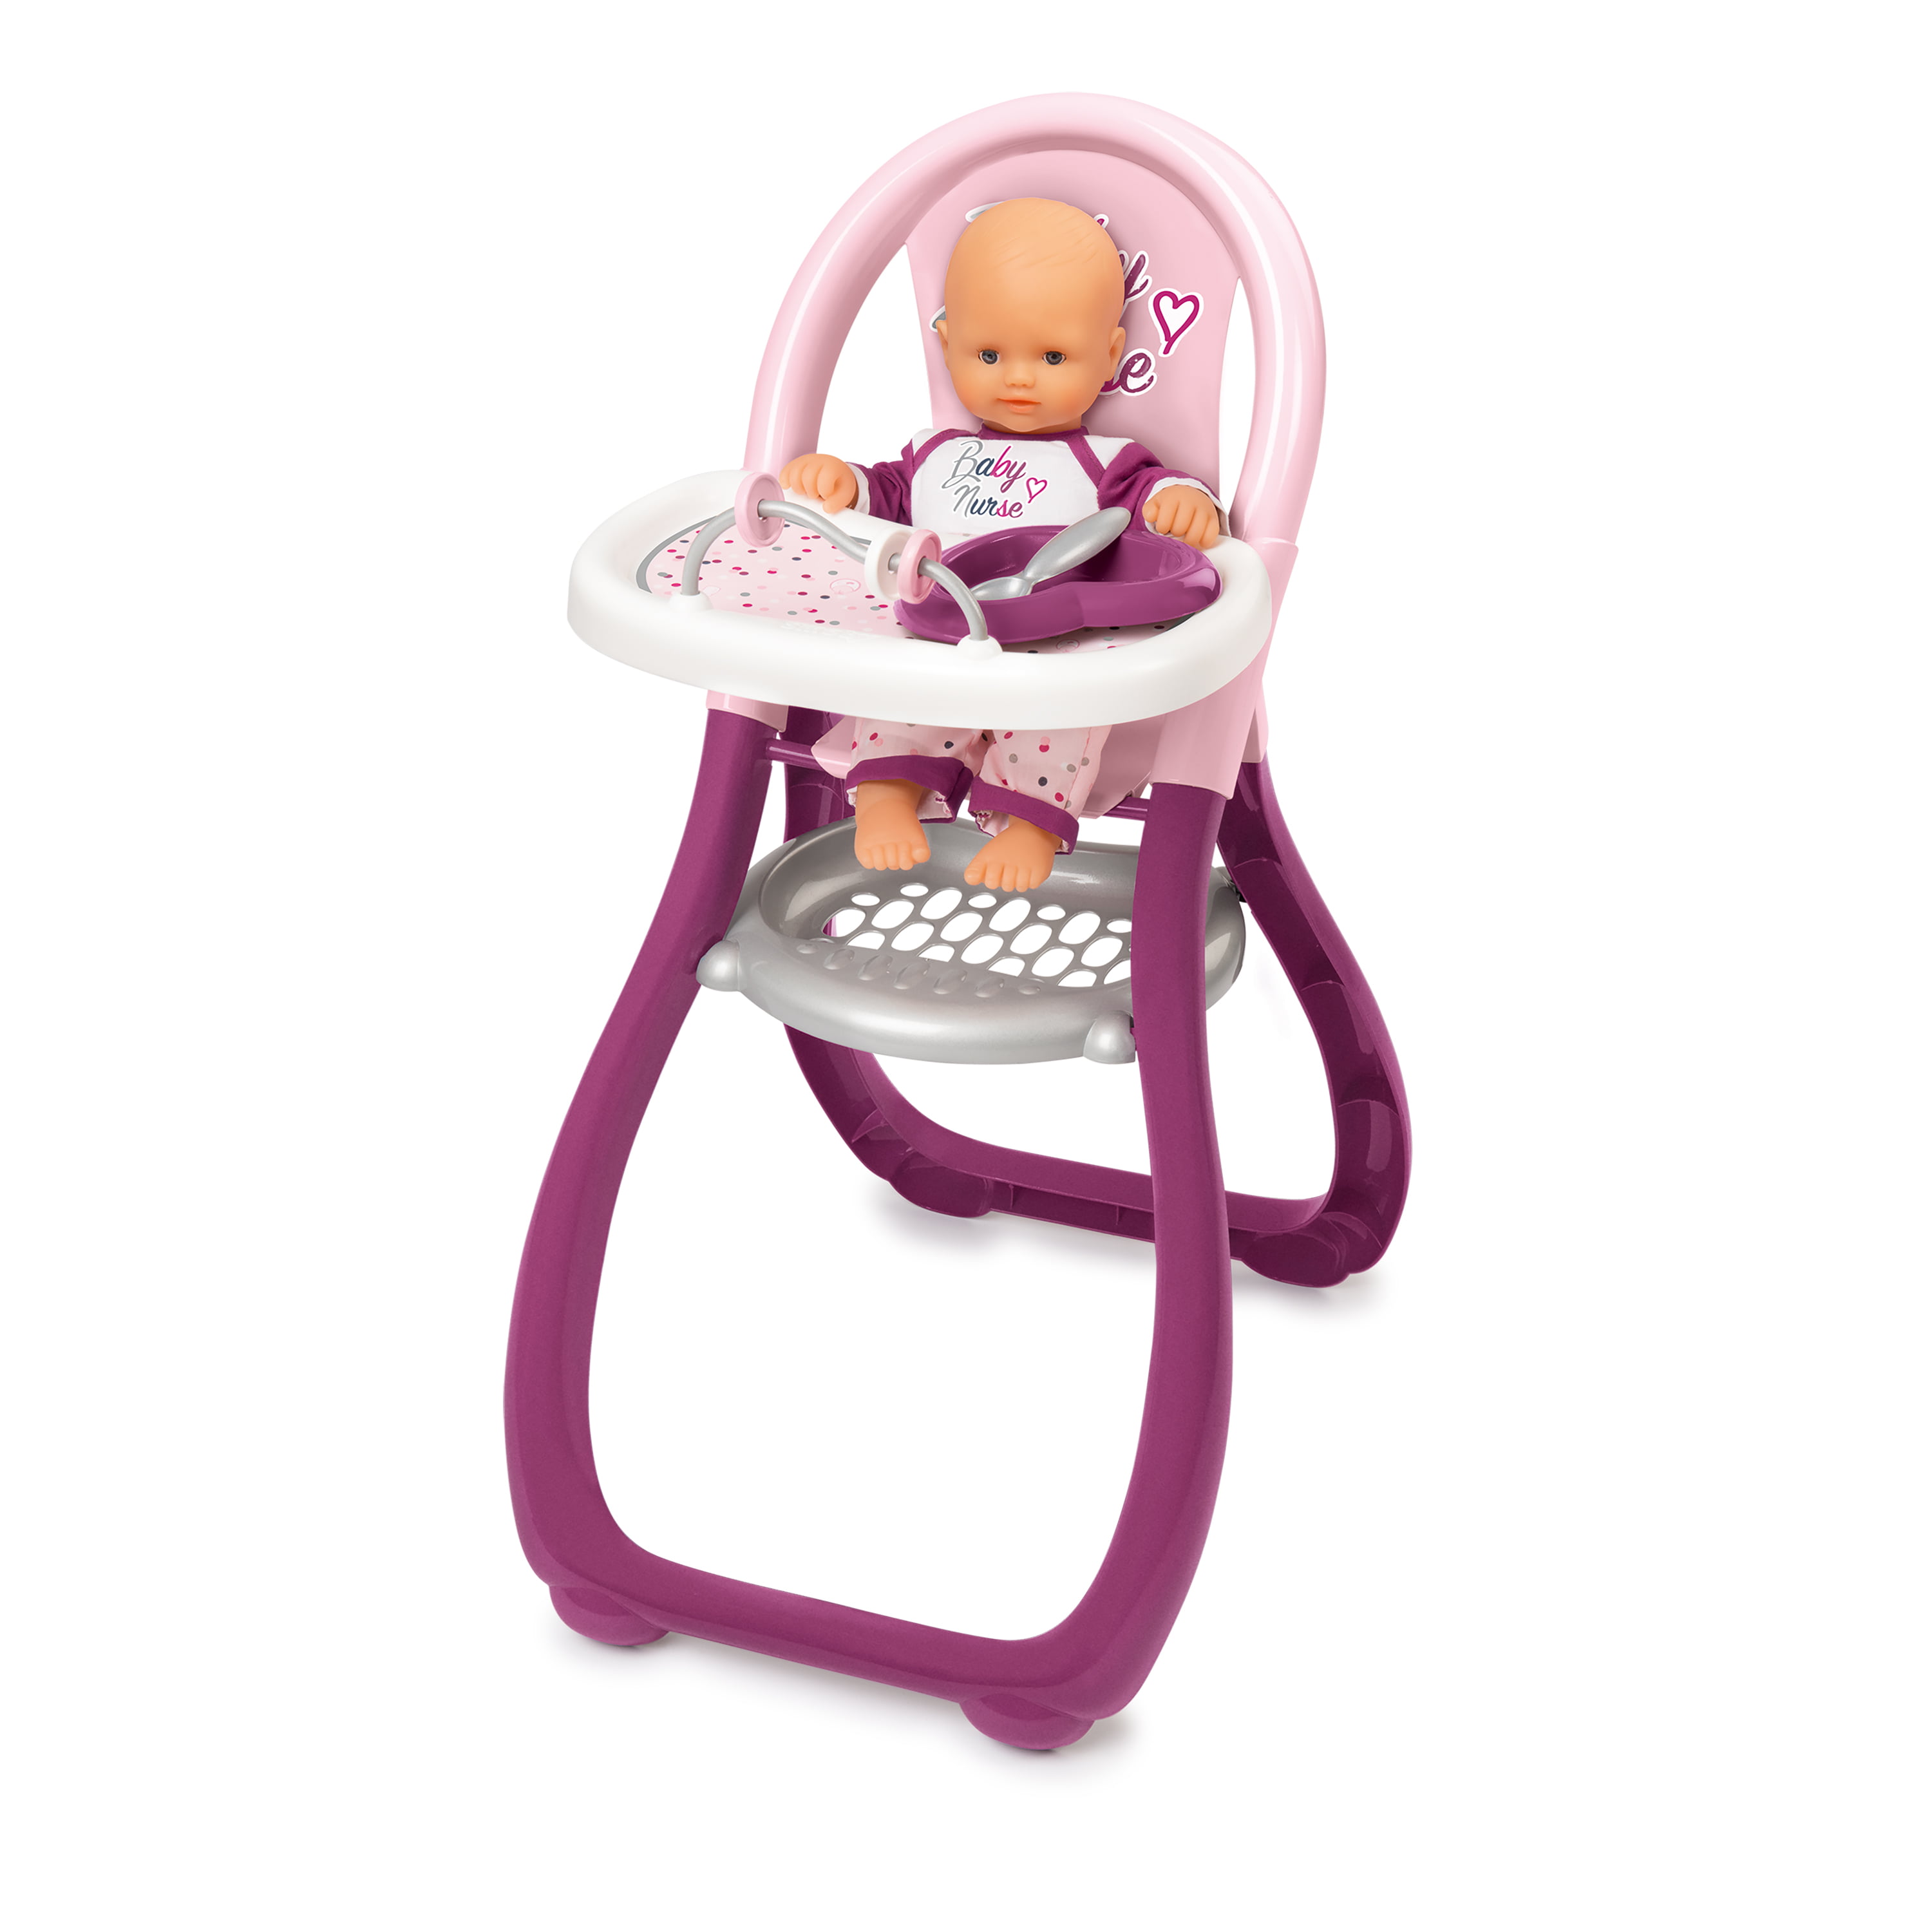 Smoby - Baby Nurse High Chair For Dolls with 2 Accessories